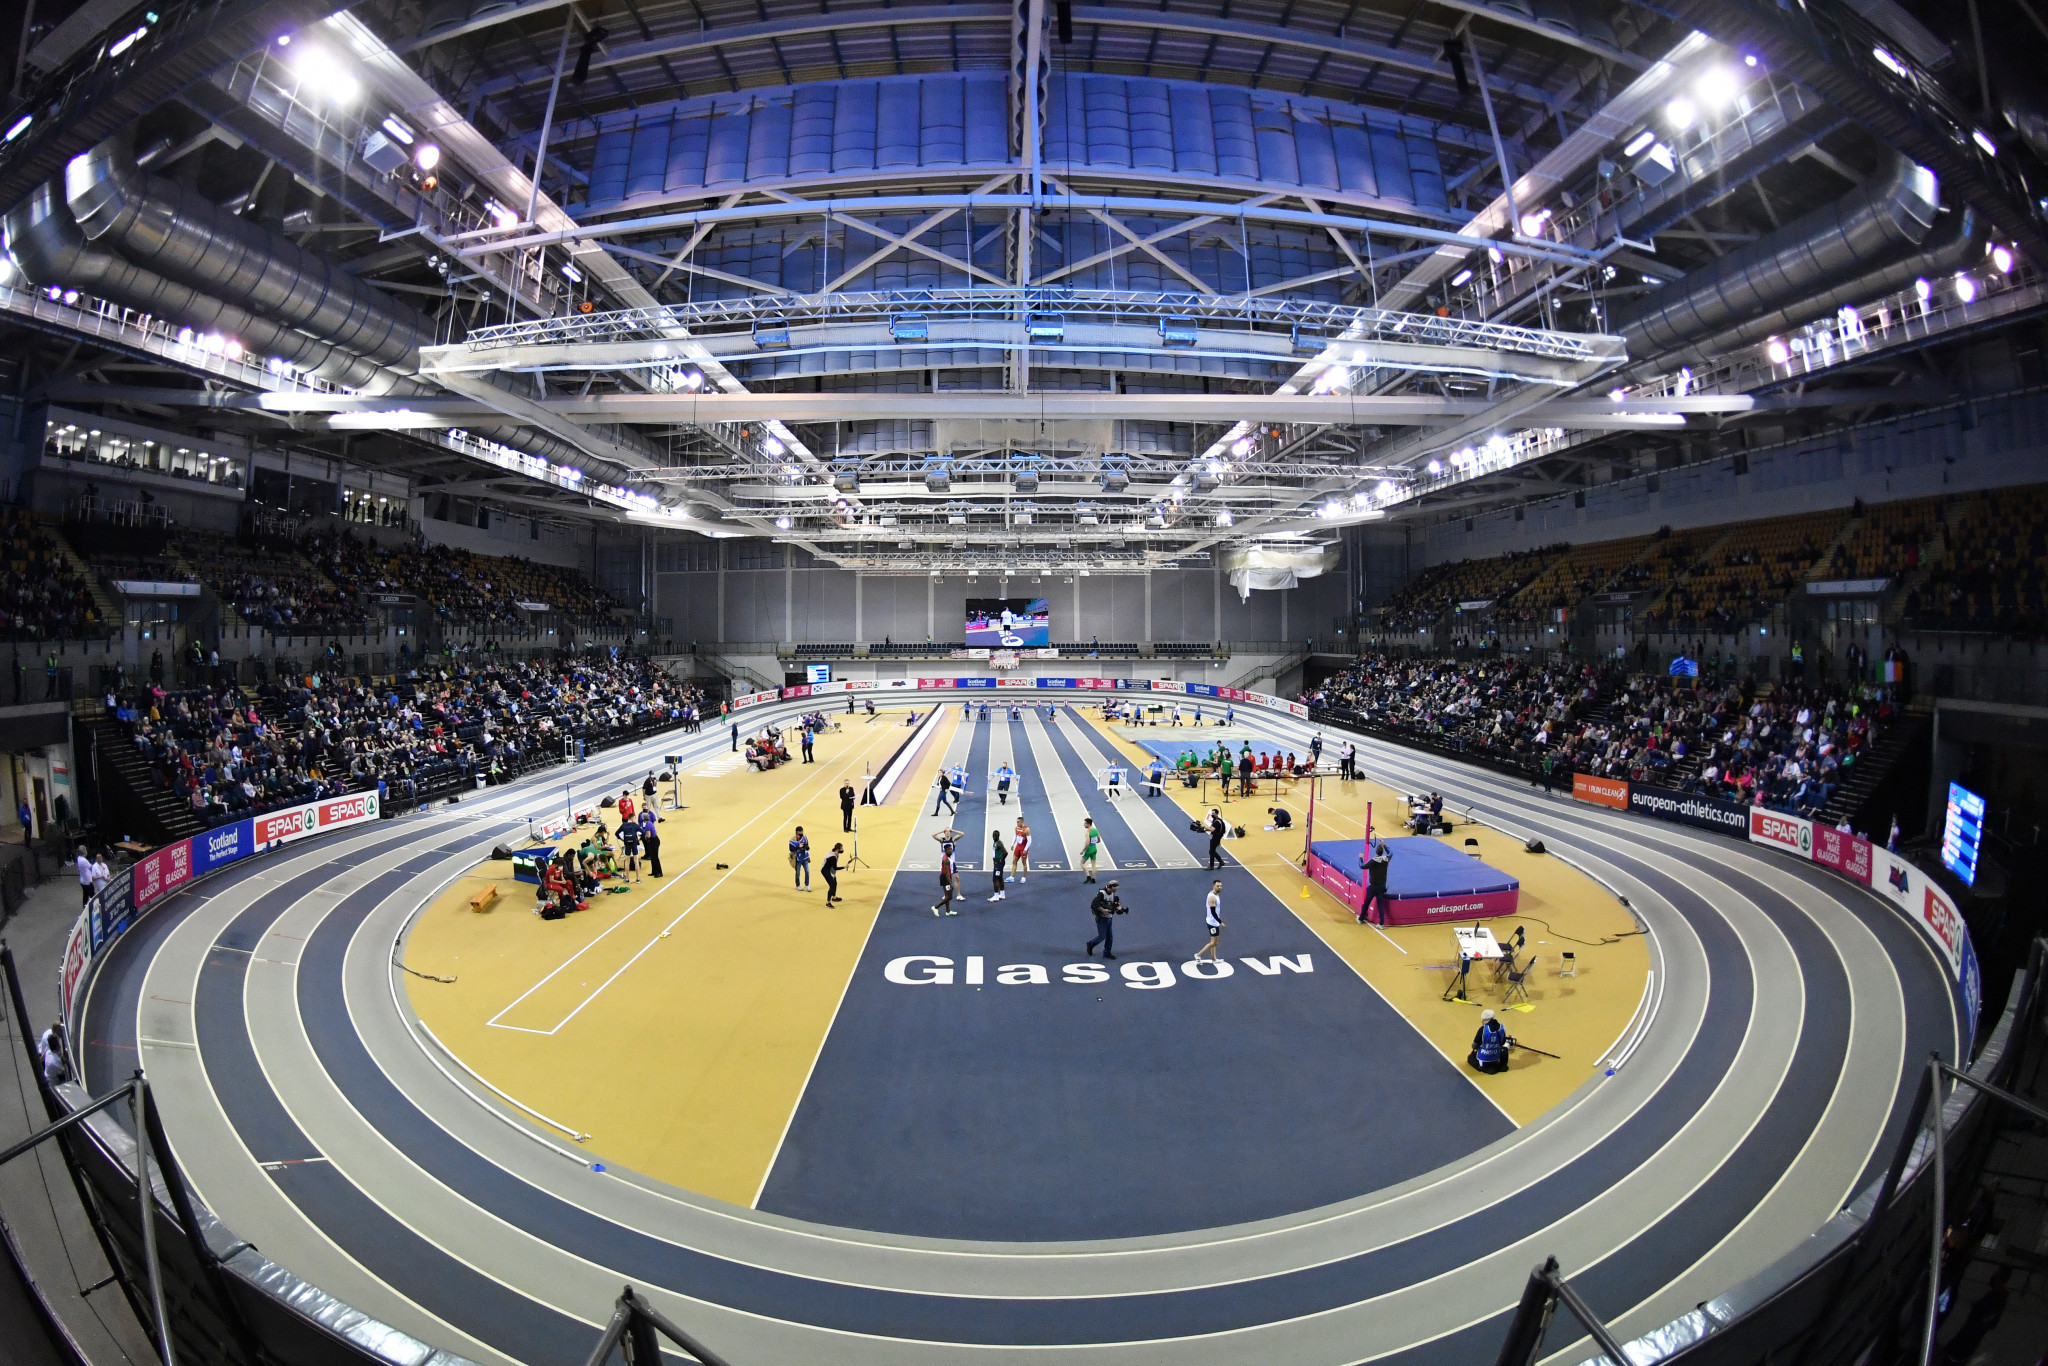 World Athletics Indoor Championships schedule provides 1500m and 3,000m double opportunity in Glasgow